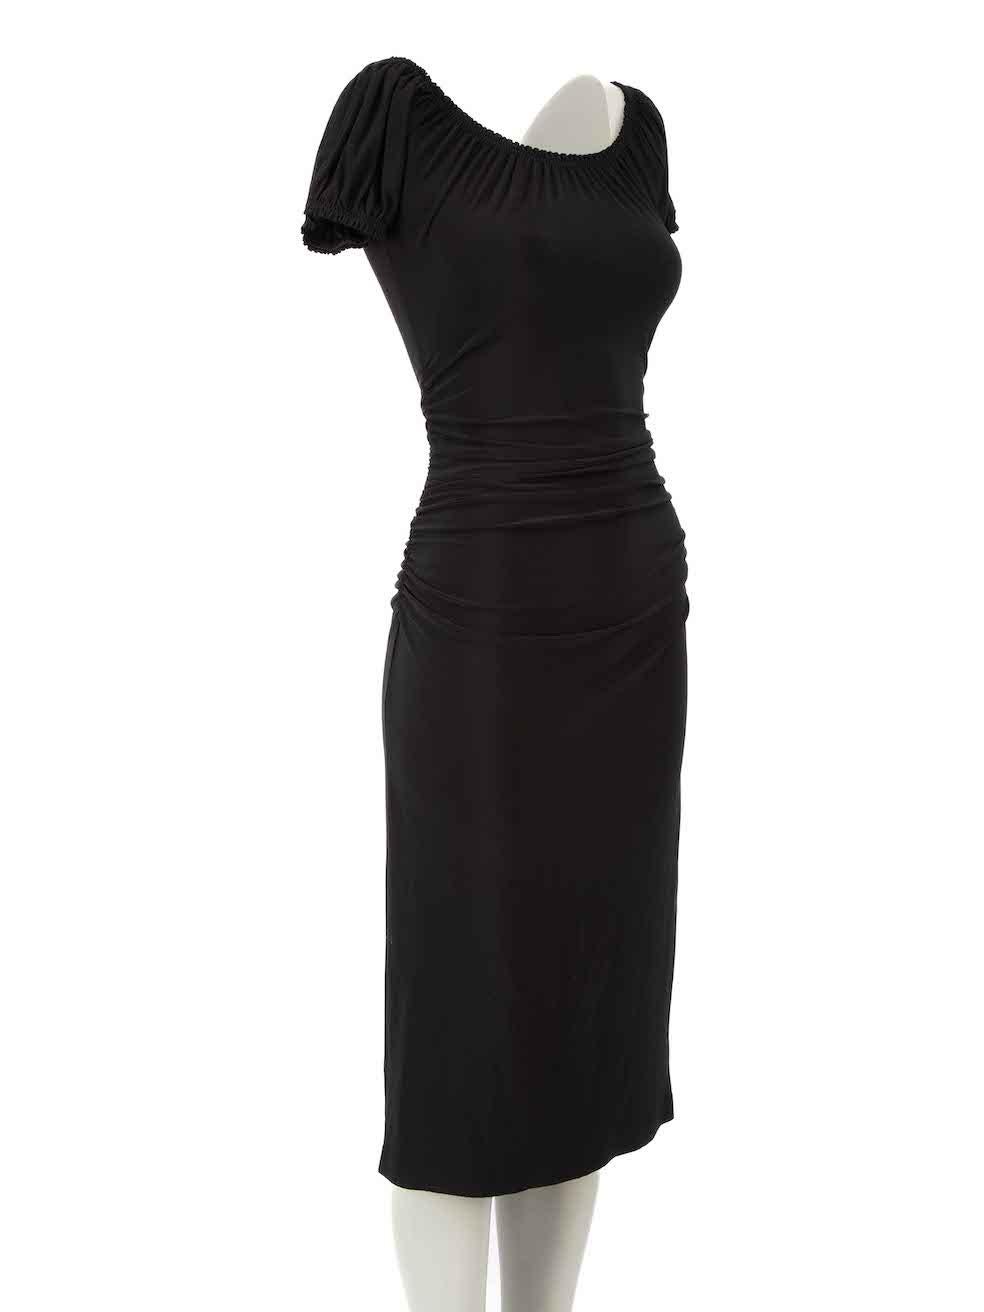 CONDITION is Very good. Minimal wear to dress is evident. Minimal wear to the rear with pilling to the texture on this used Norma Kamali designer resale item.
 
 Details
 Black
 Polyester
 Dress
 Midi
 Off-the-Shoulder
 Short sleeves
 Ruched
 Figure